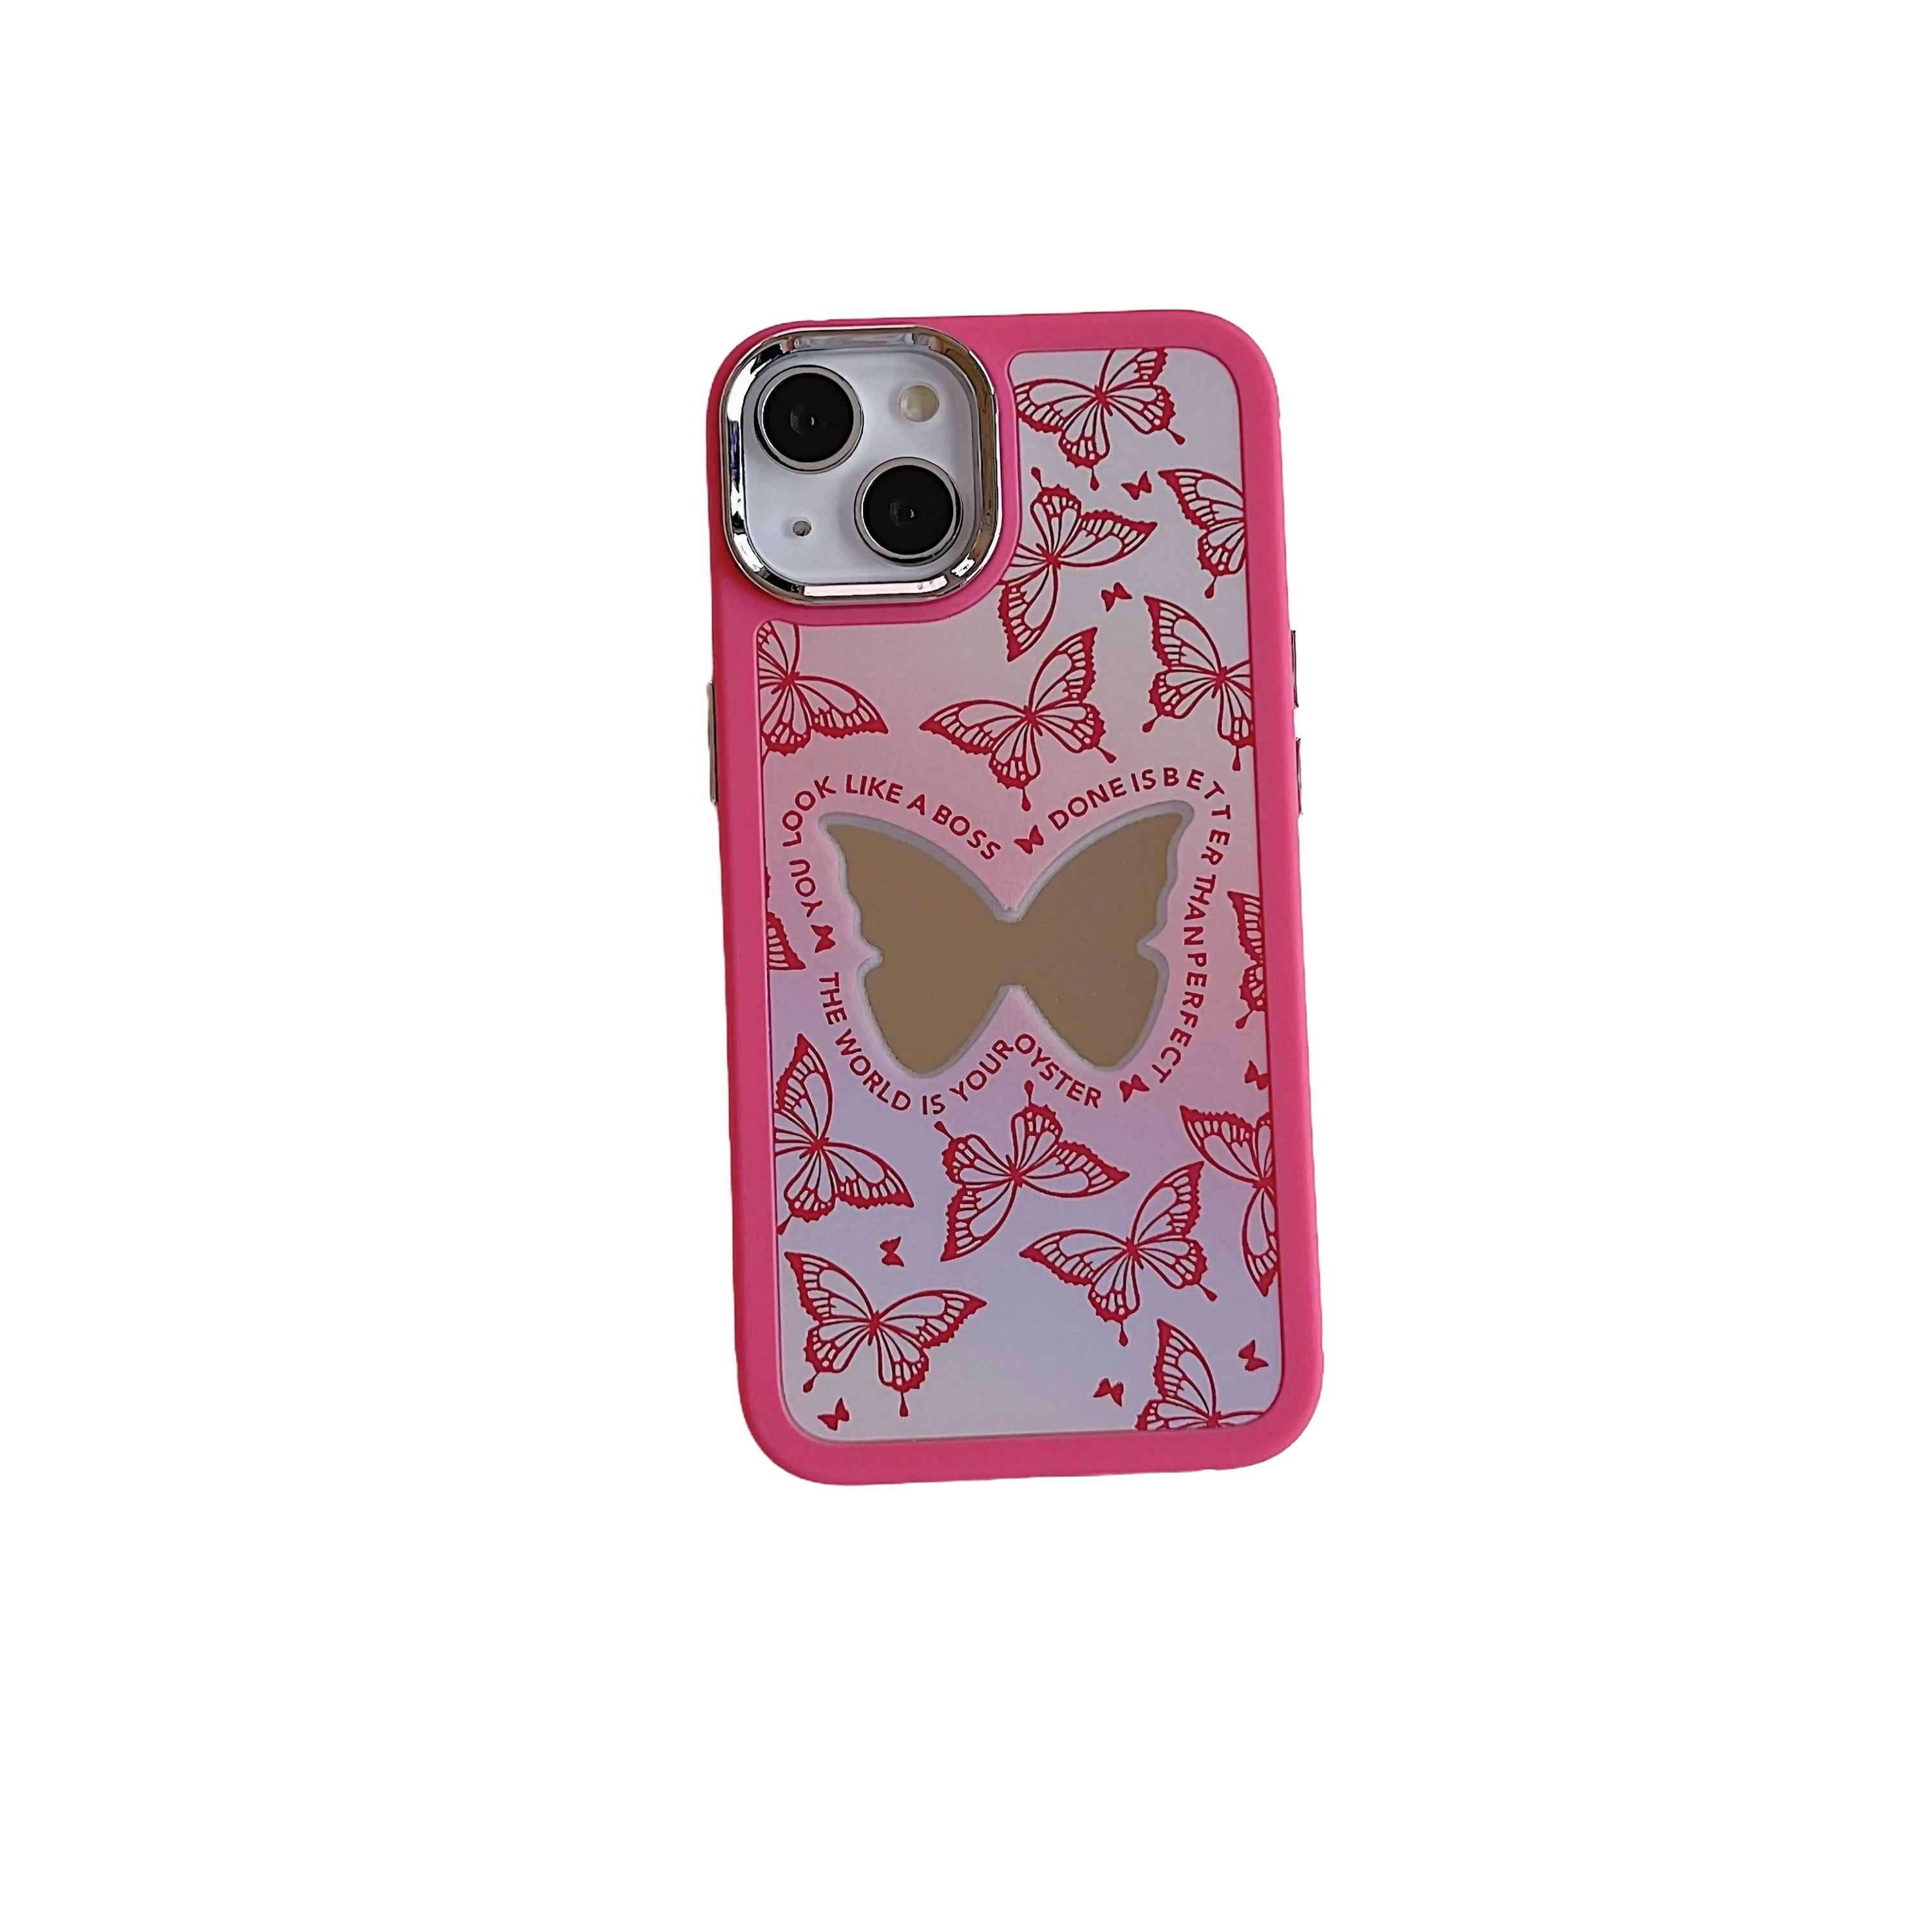 Aesthetic pink iPhone case with butterfly design without phone chain